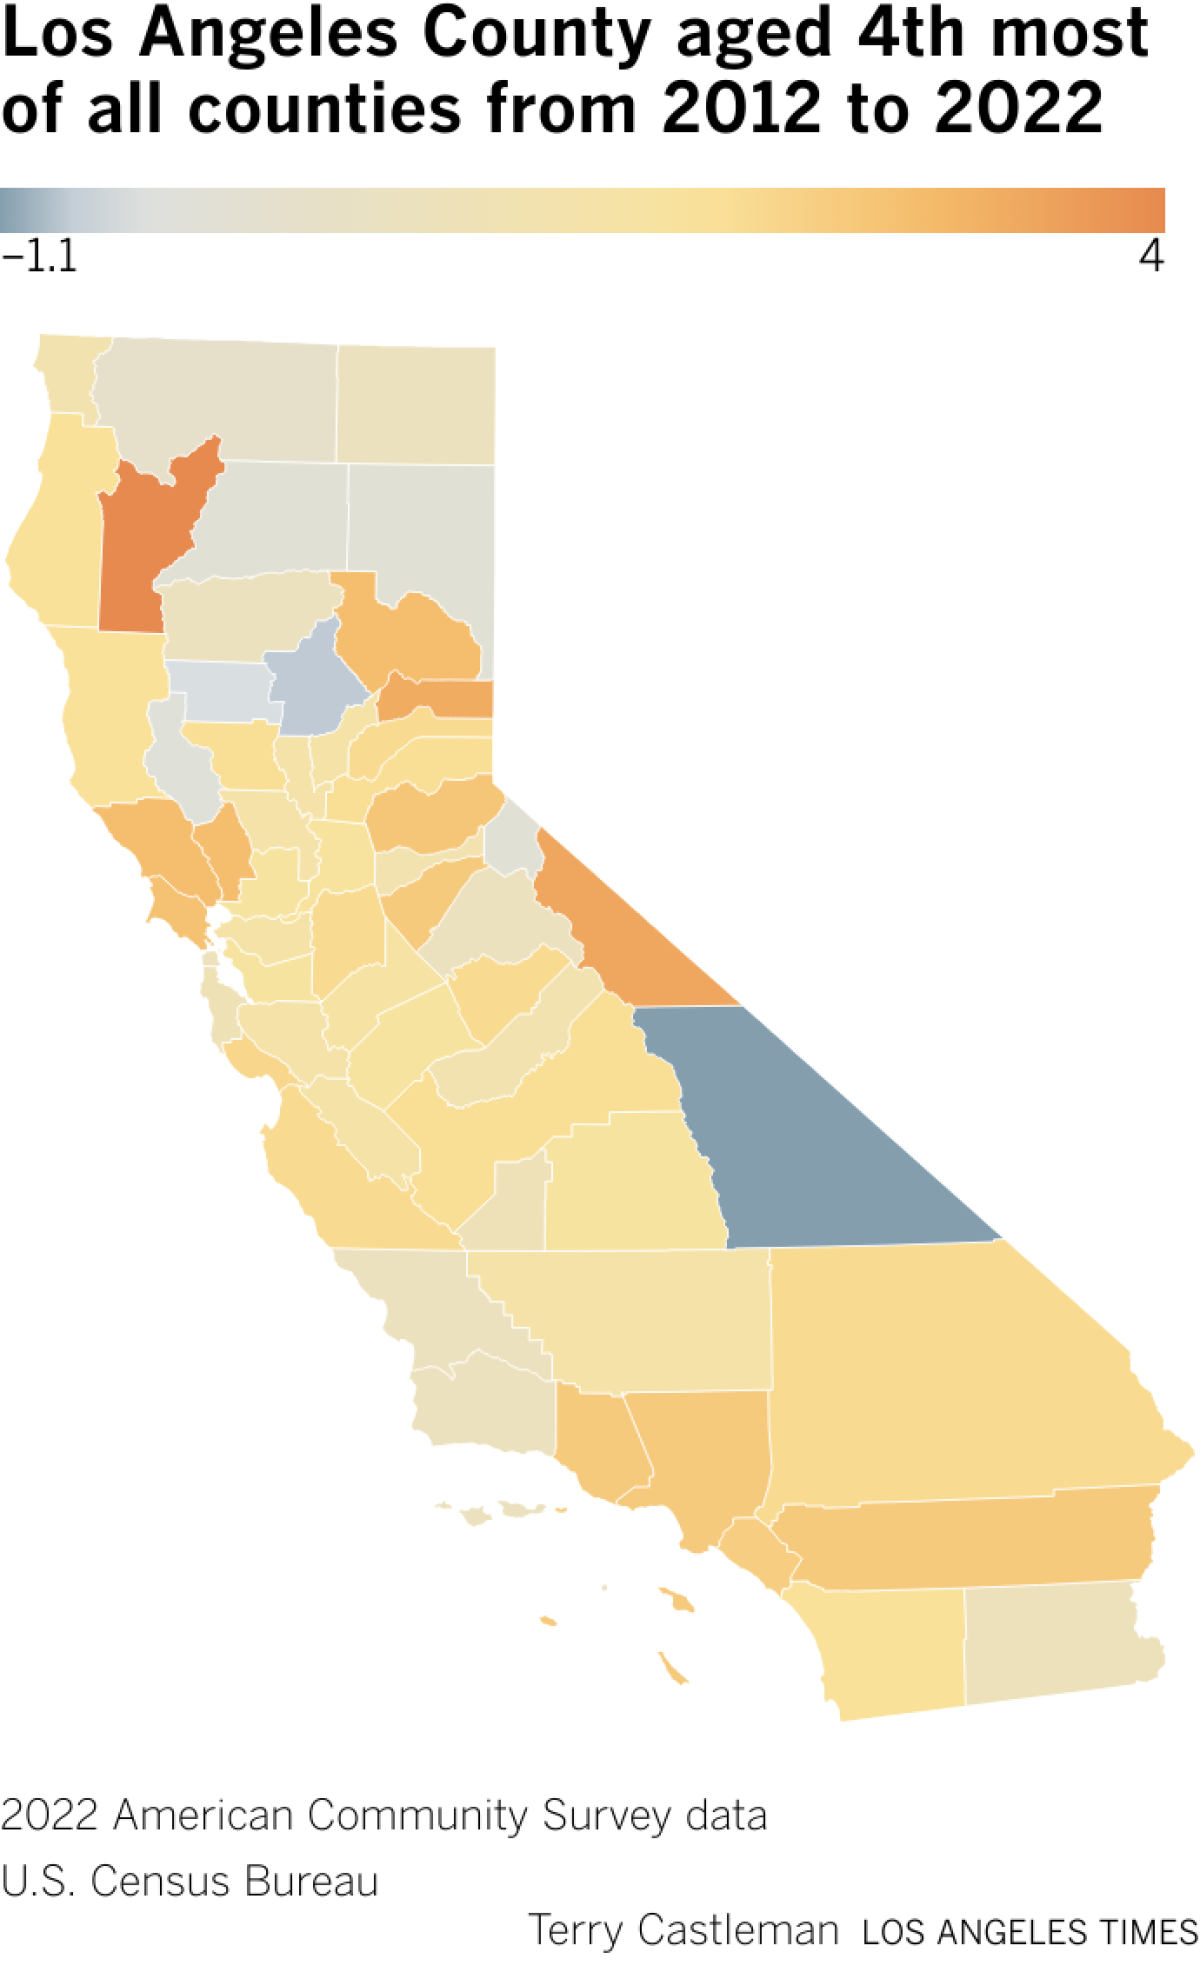 Map showing median age in each California county